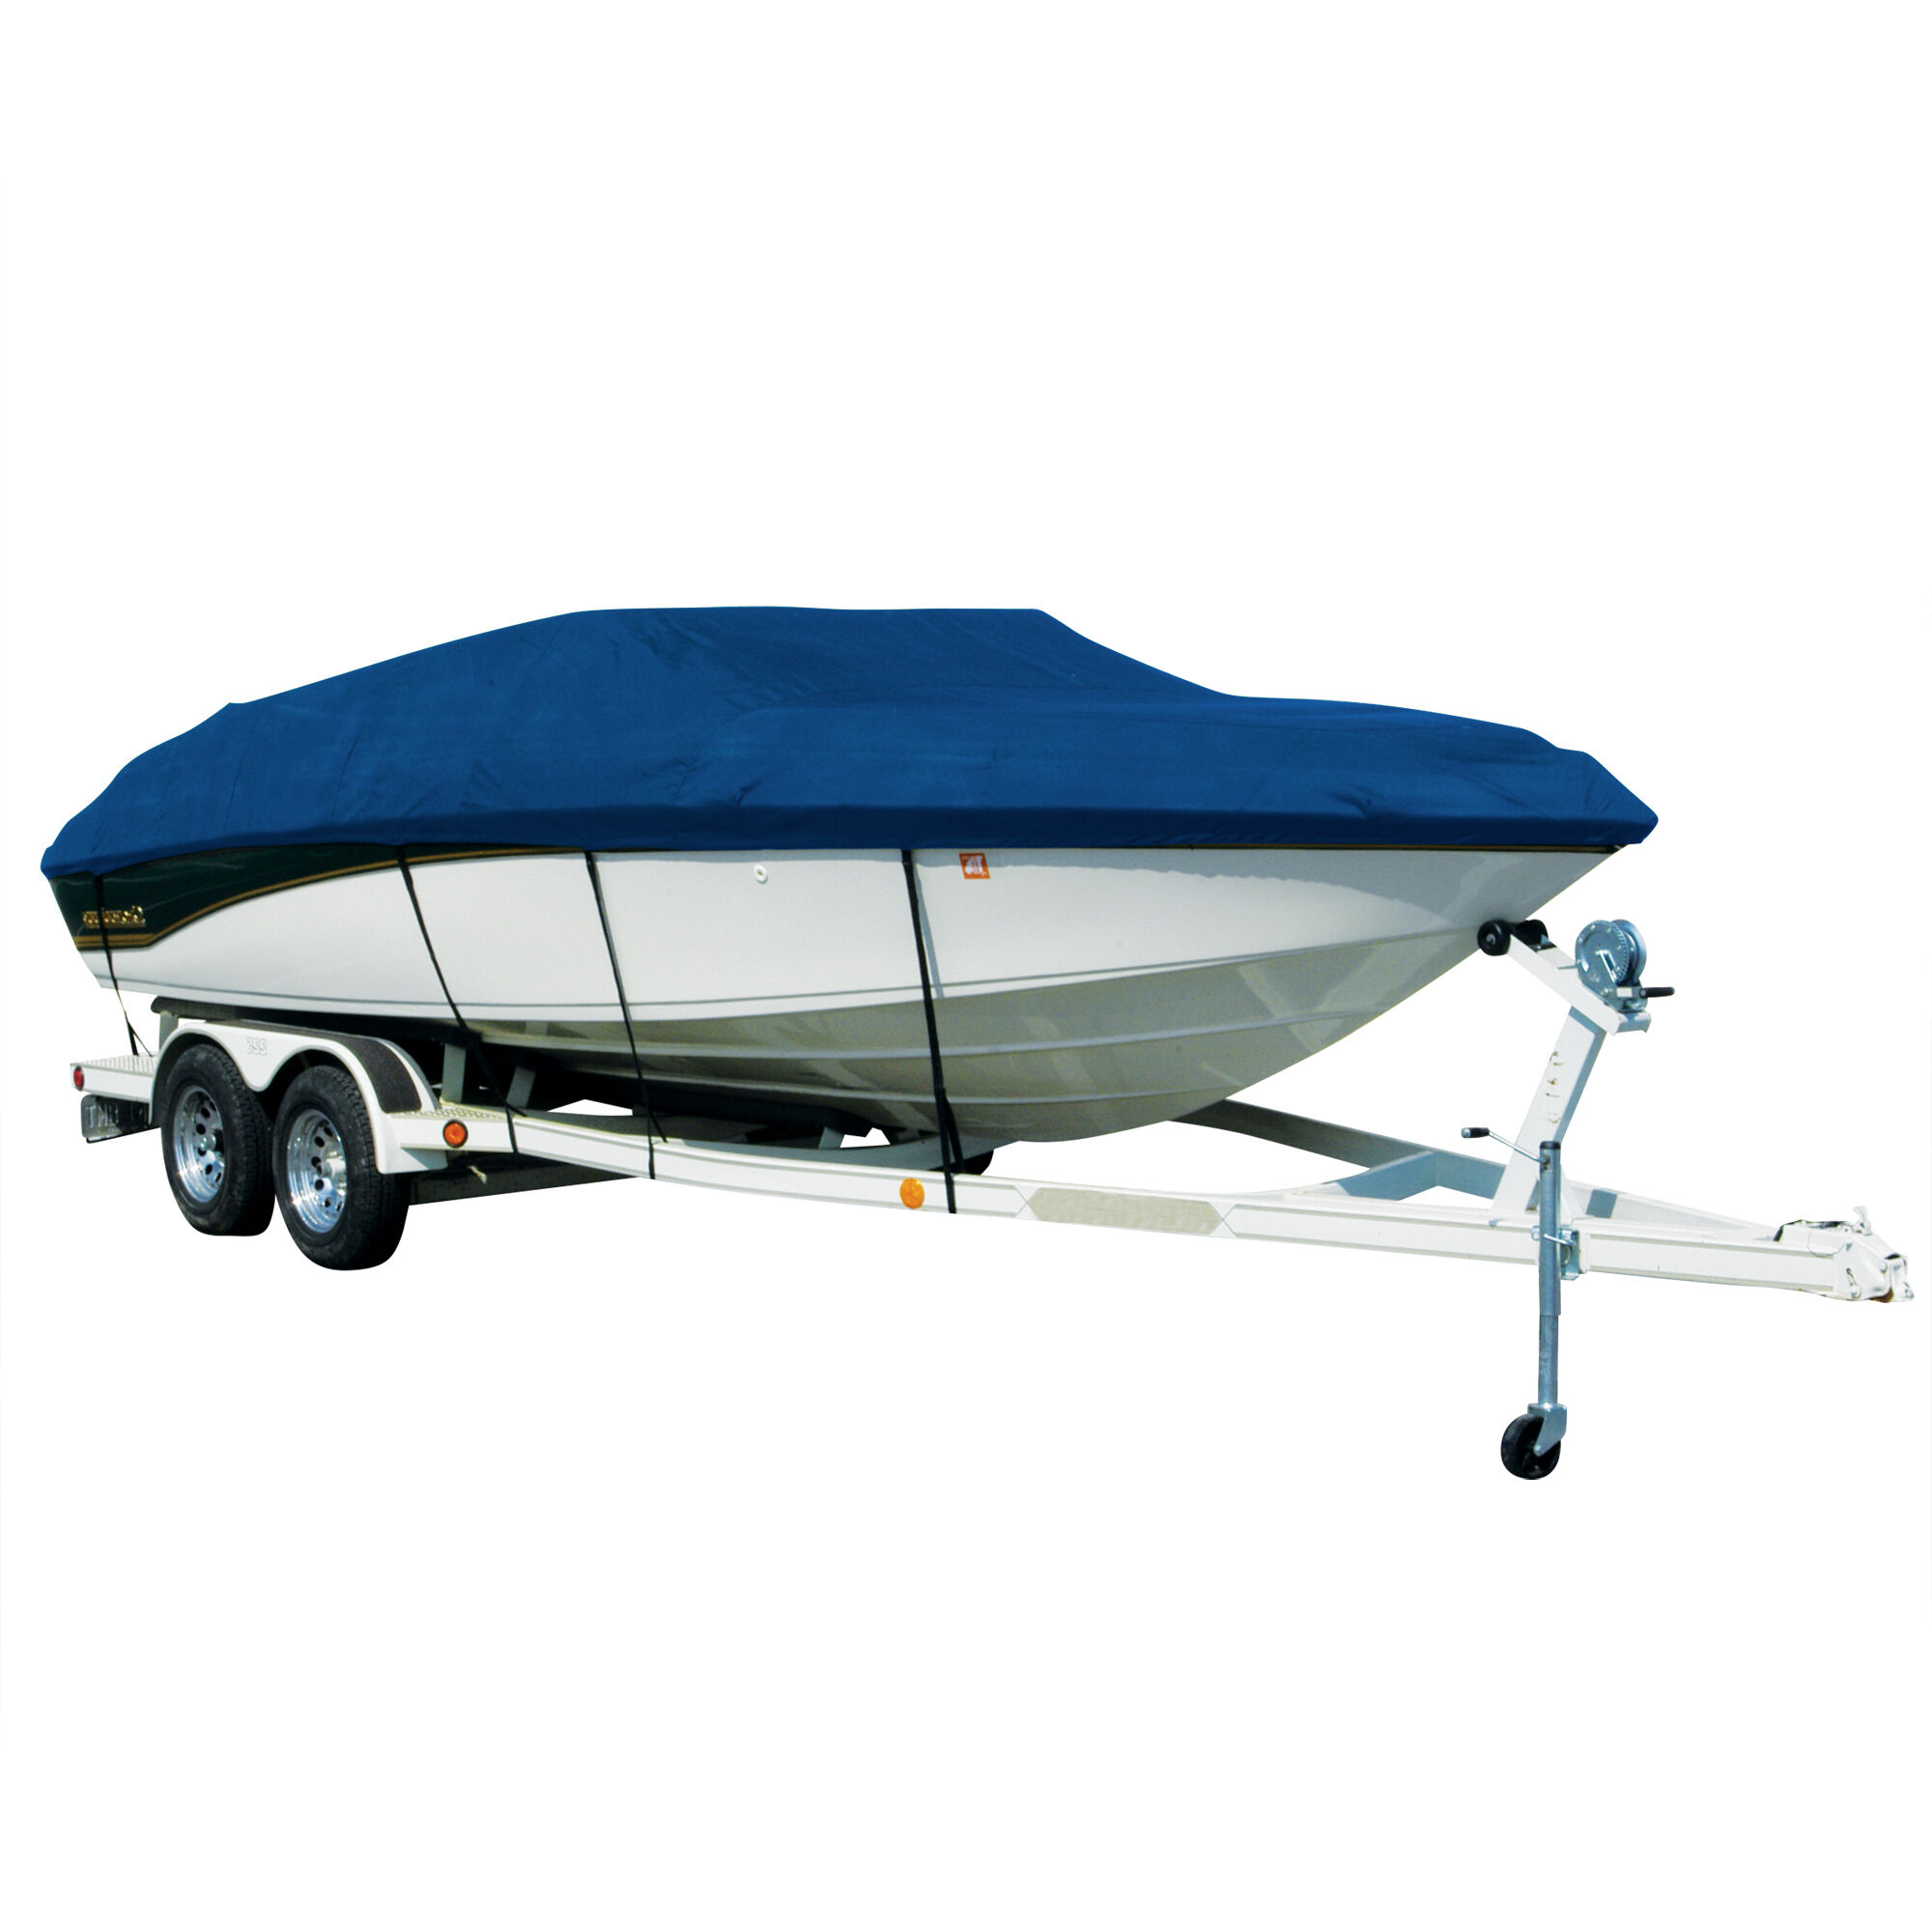 Covermate TRACKER PRO BASS 175 TF/175 TXW ALUM Boat Cover in Blue Polyester